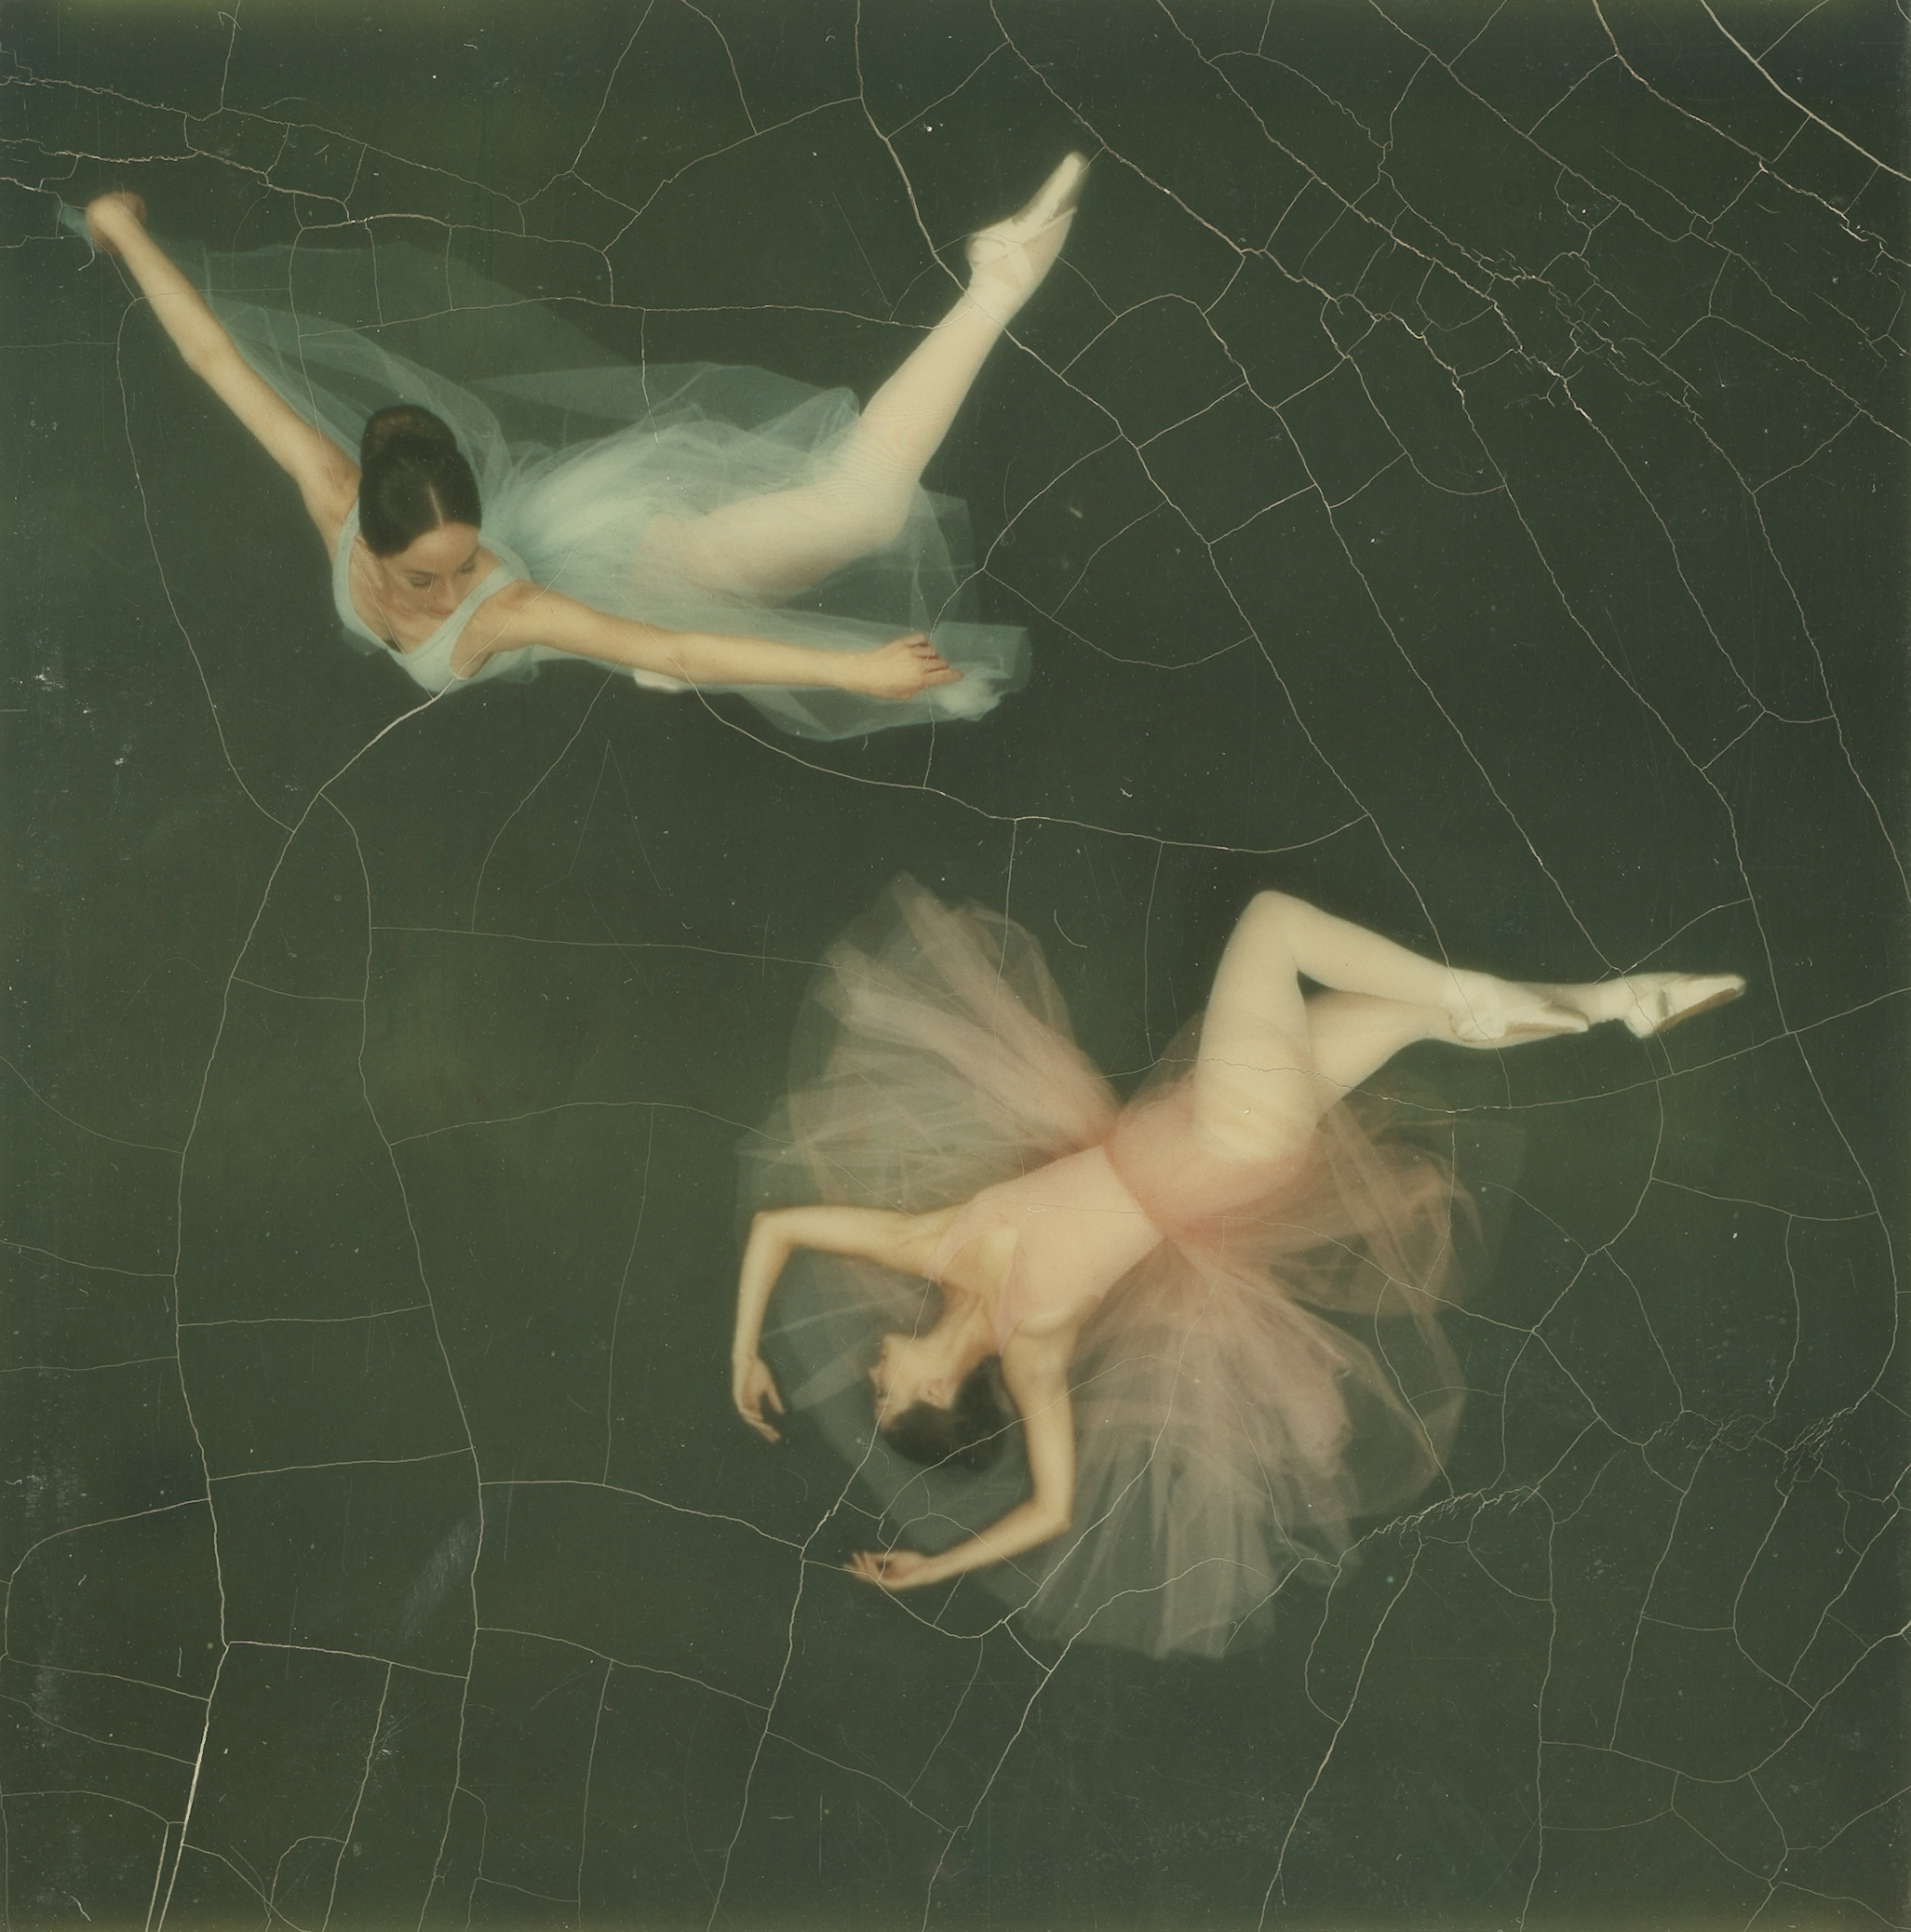 A study in motion featuring two dancers from the Joffrey Ballet, made with a Polaroid SX-70 camera, 1972.